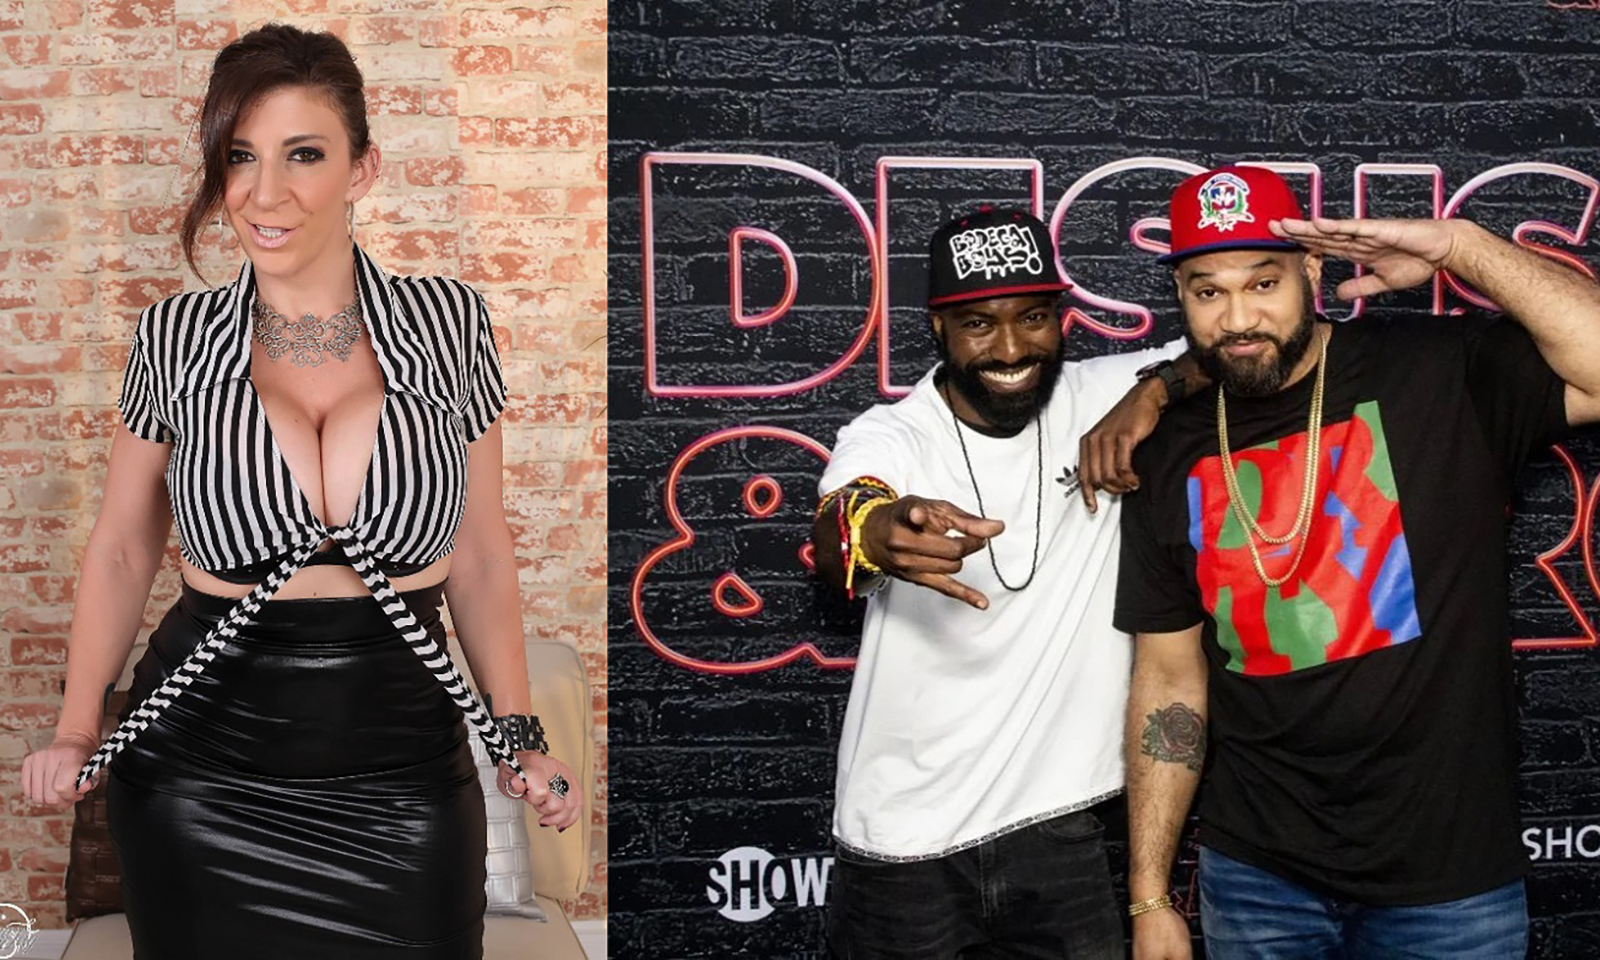 Sara Jay Will Be Appearing On Showtime's 'Desus & Mero' Tonight